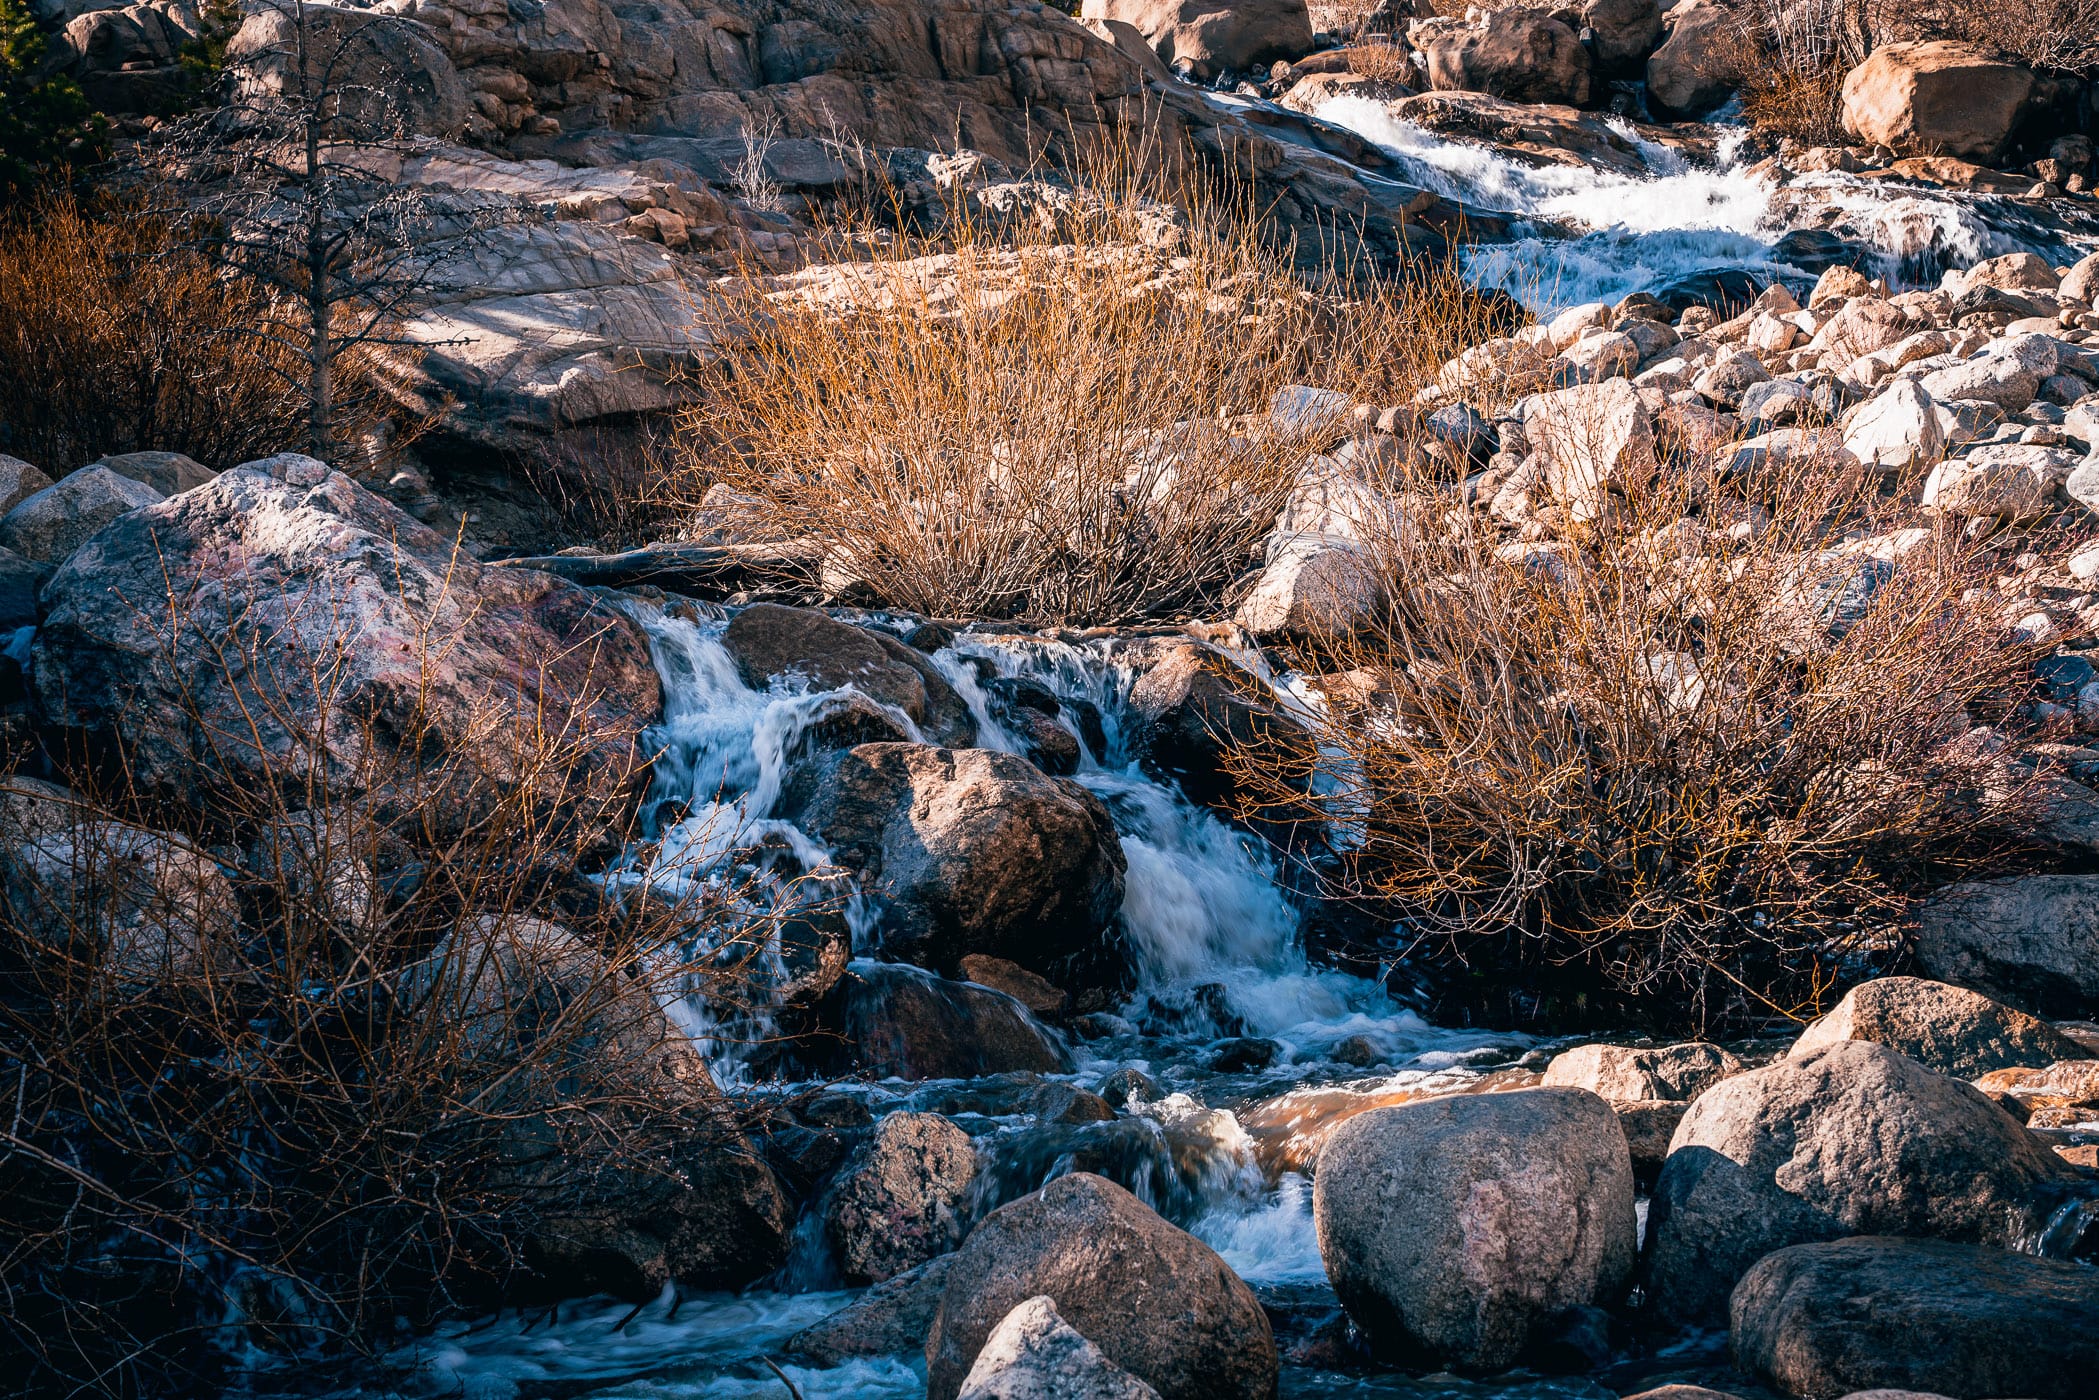 The Roaring River tumbles over rocks in Colorado's Rocky Mountain National Park.